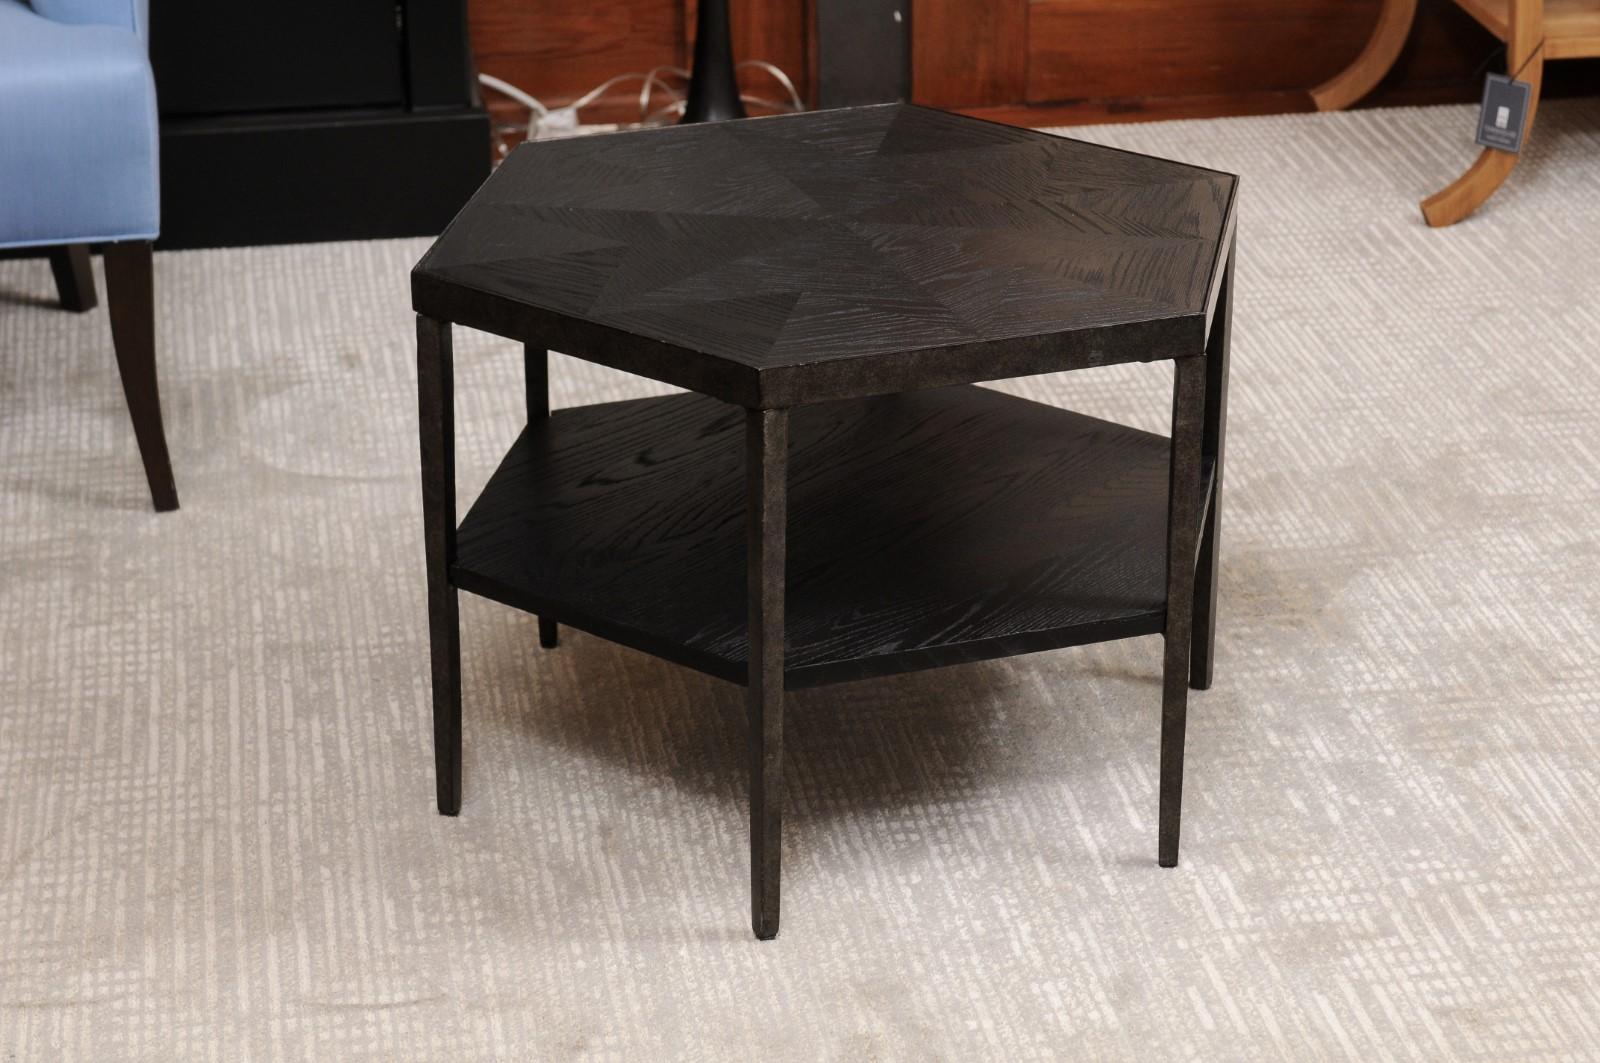 Bassett iron and wood end tables.